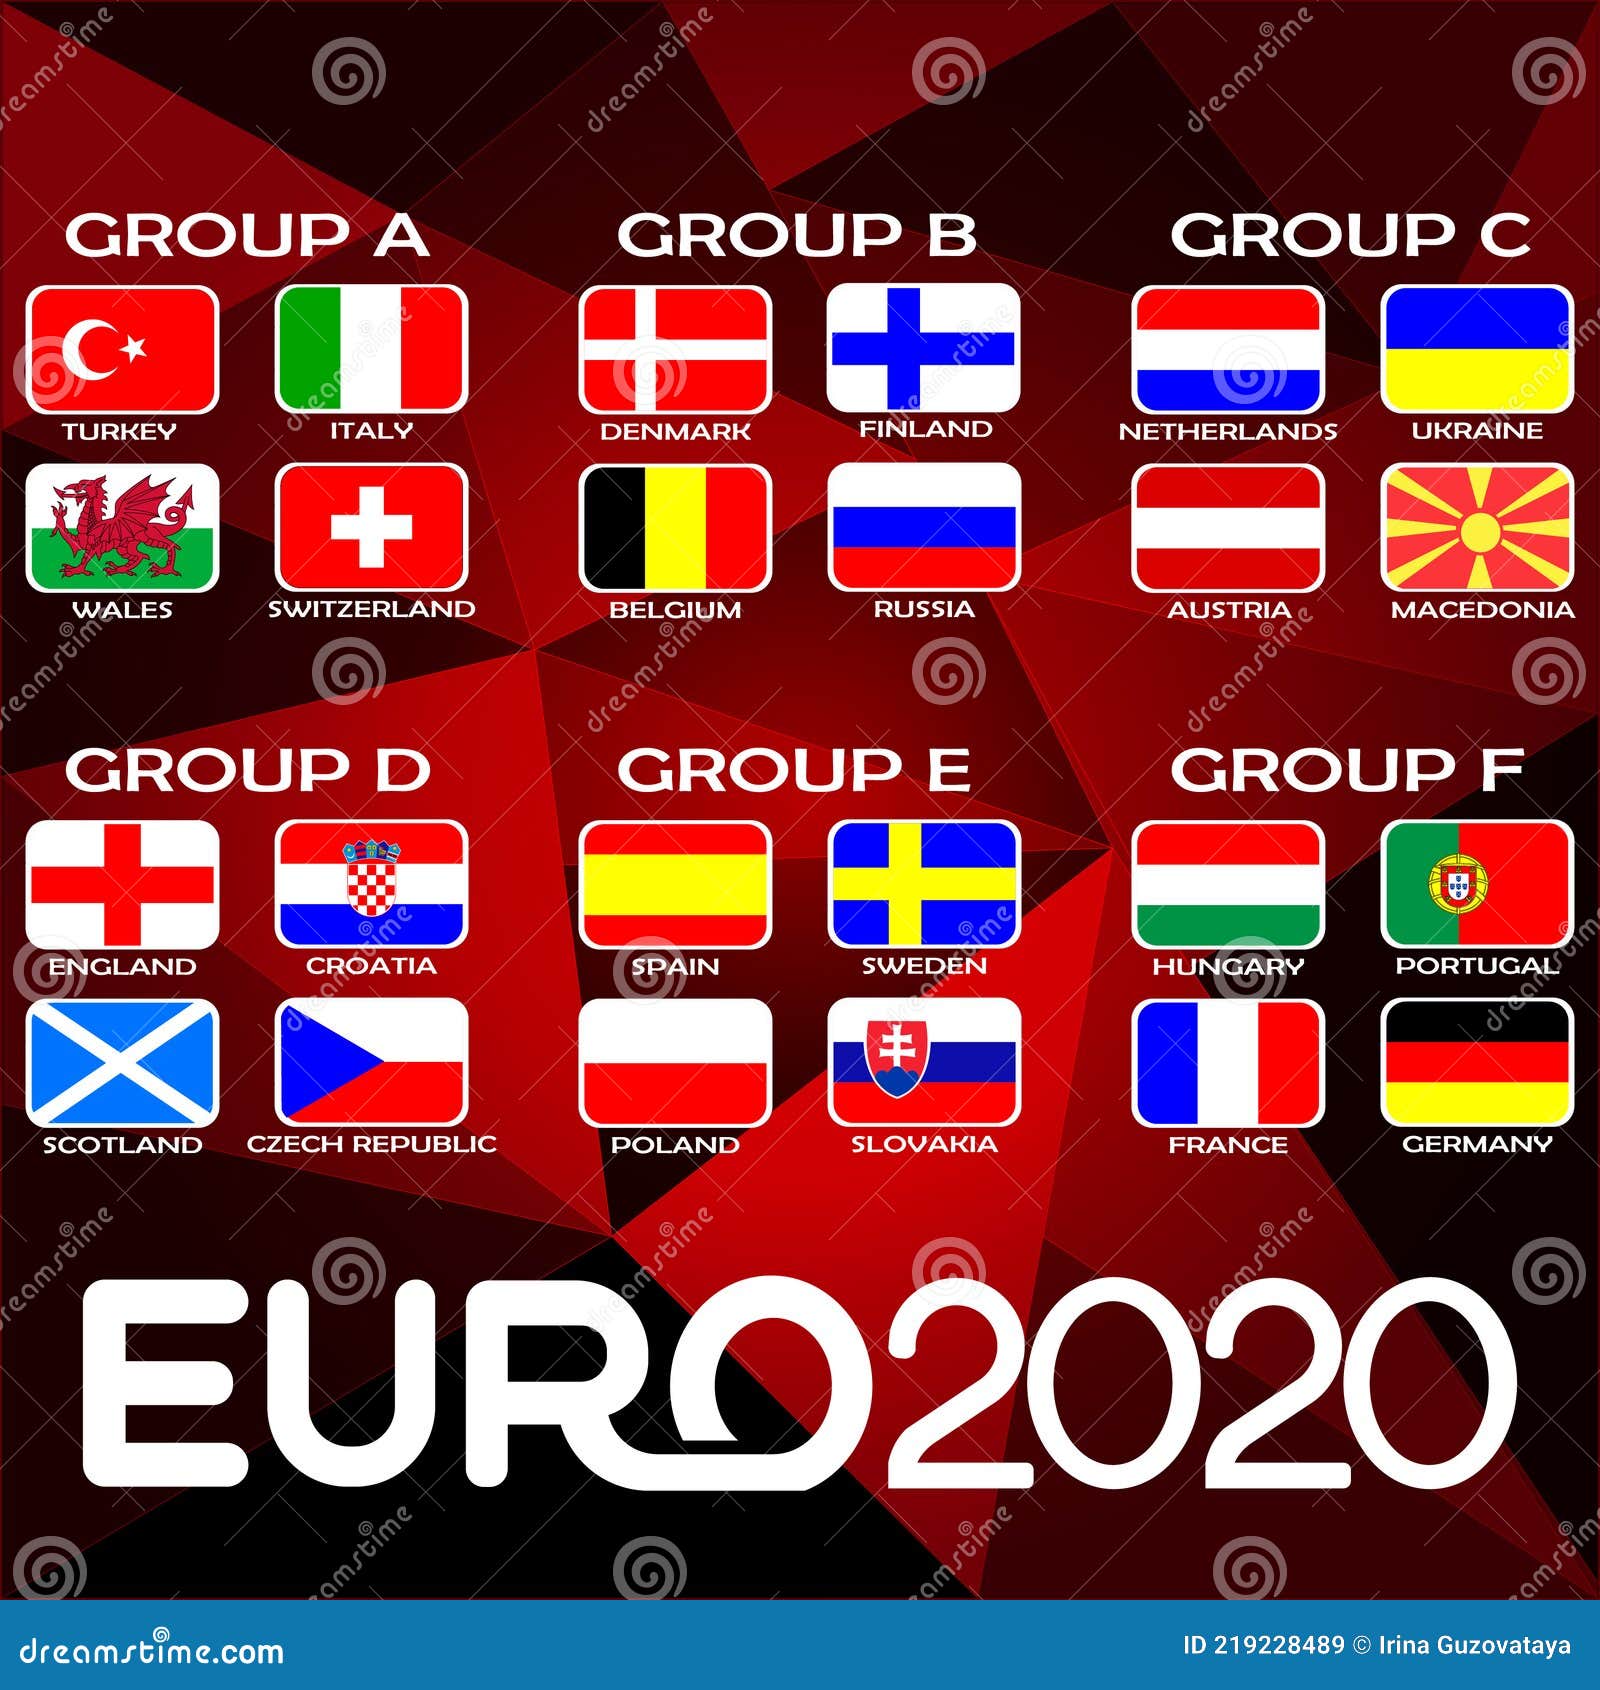 And groups fixtures 2020 euro Euro 2020